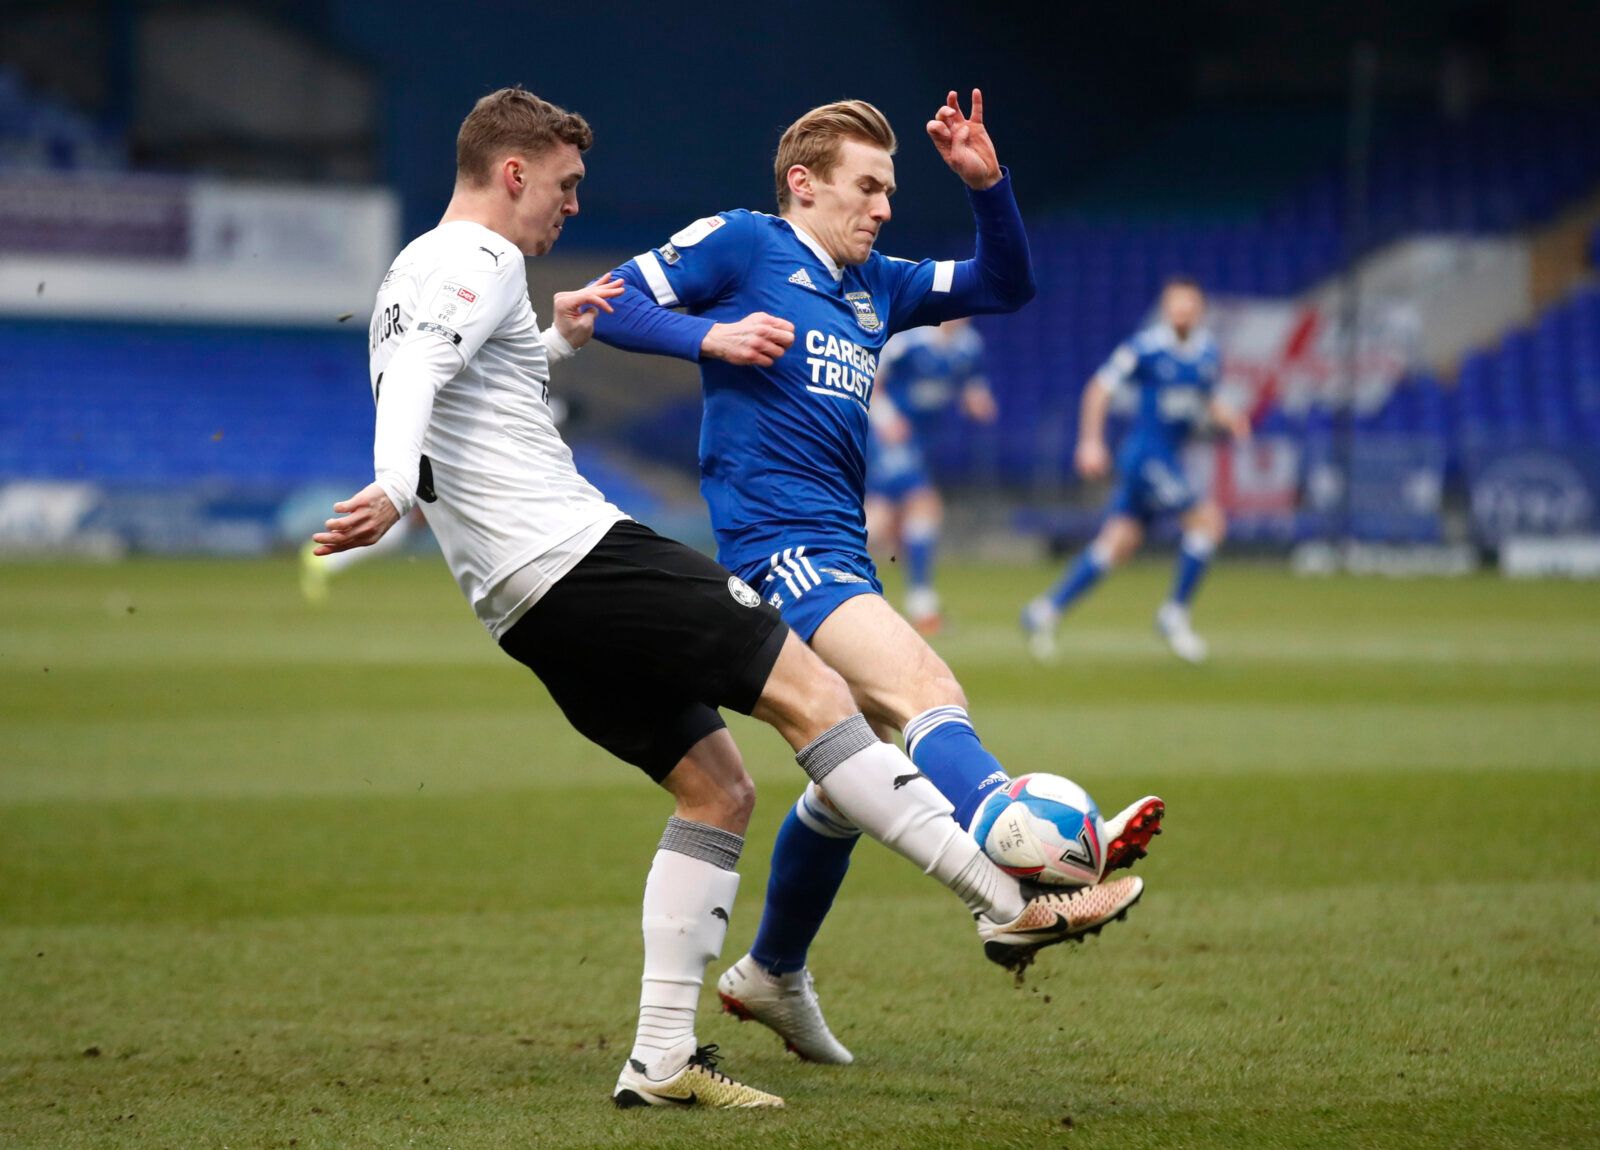 Soccer Football - League One - Ipswich Town v Peterborough United - Portman Road, Ipswich, Britain - January 23, 2021 Ipswich Town's Flynn Downes in action with Peterborough United's Jack Taylor Action Images/Matthew Childs EDITORIAL USE ONLY. No use with unauthorized audio, video, data, fixture lists, club/league logos or 'live' services. Online in-match use limited to 75 images, no video emulation. No use in betting, games or single club /league/player publications.  Please contact your accoun